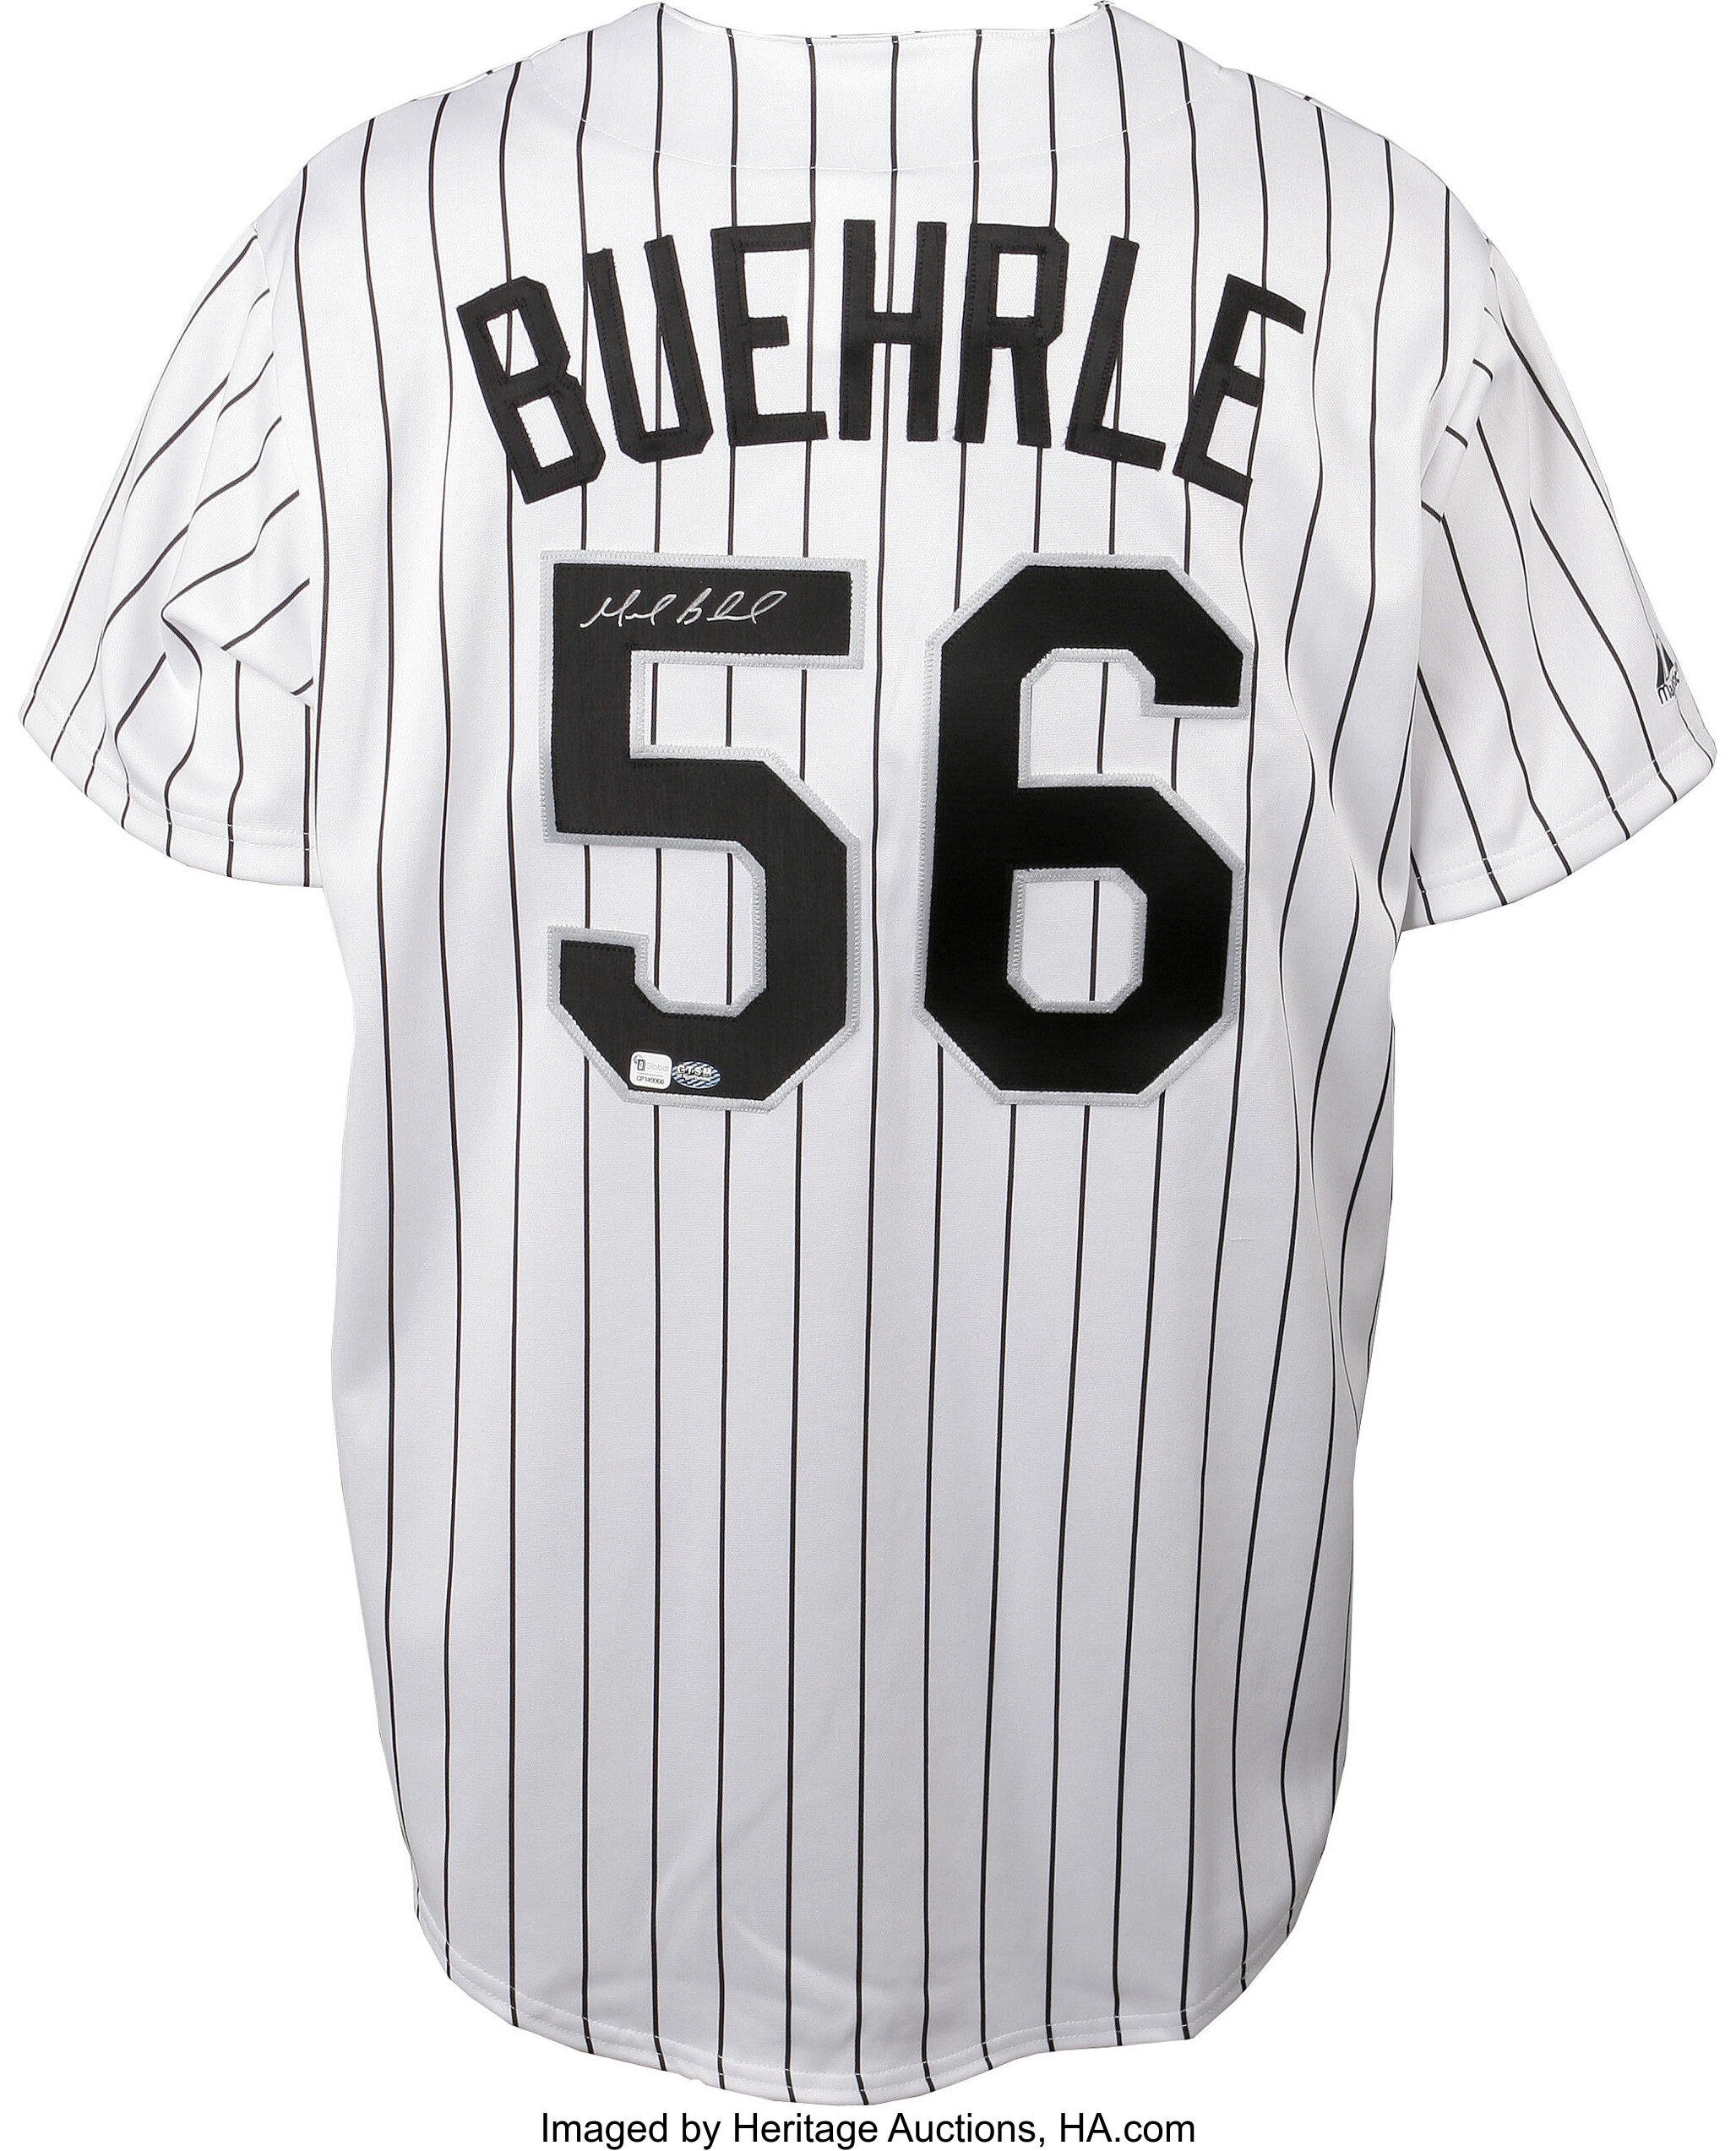 Free shipping Chicago White sox#56 Mark Buehrle Baseball Jerseys wholesale  in china cheapest - AliExpress